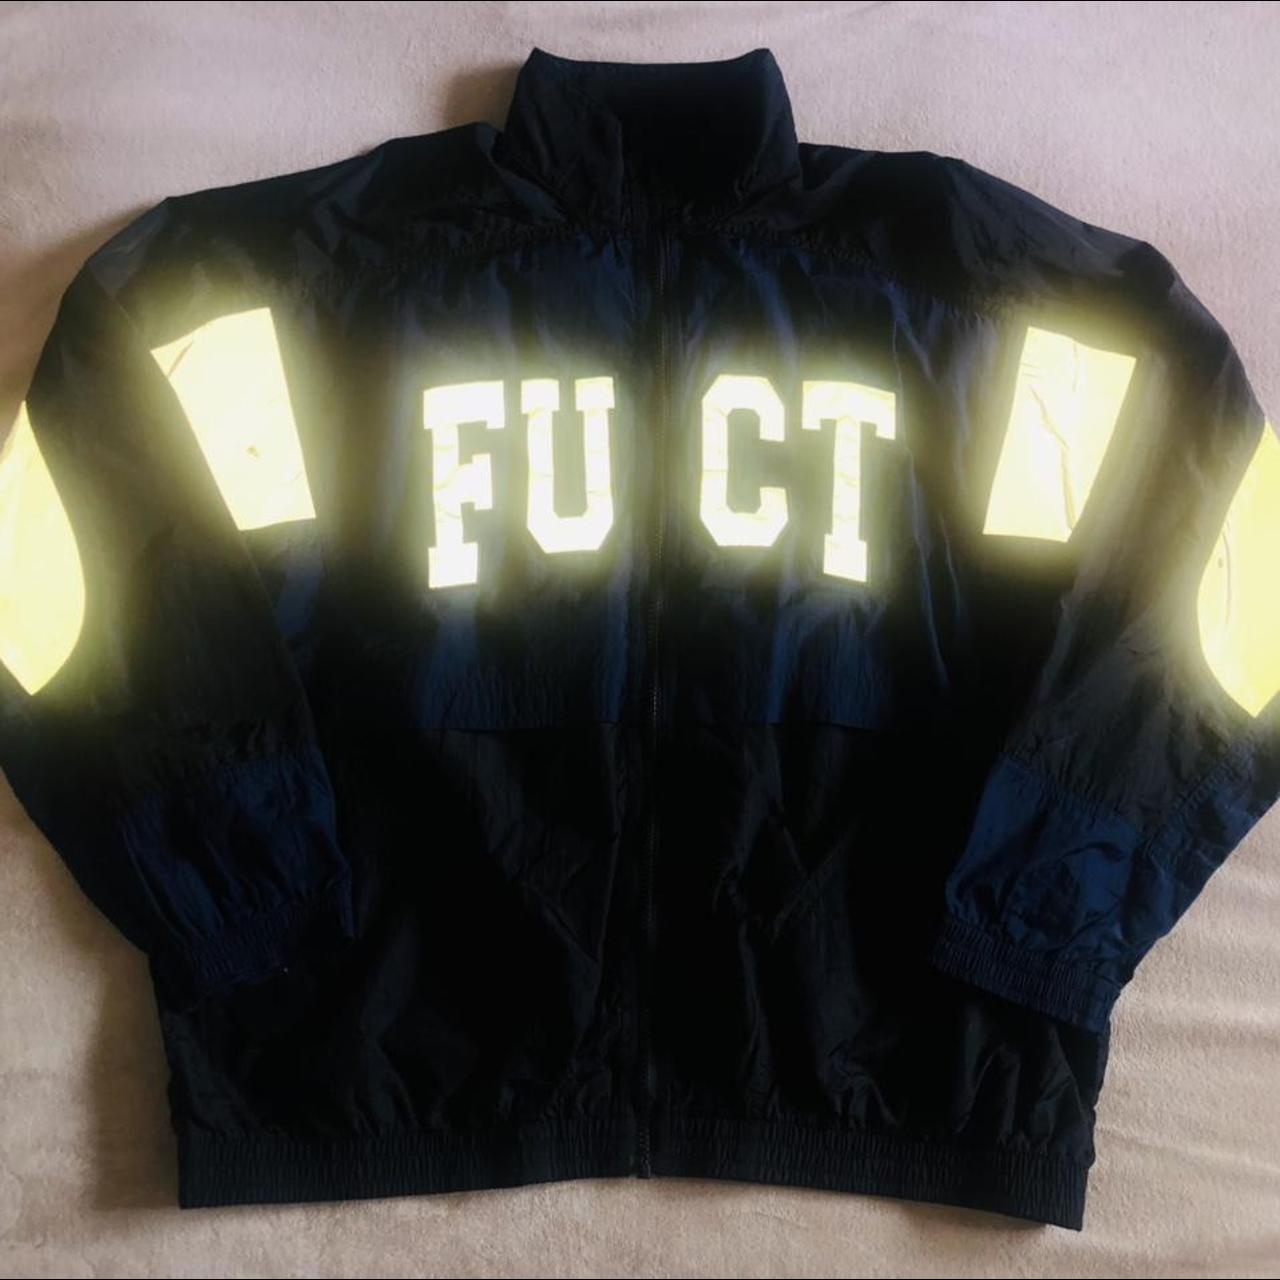 Product Image 2 - Fuct/SSDD Reflective Collegiate Track Jacket

Premium